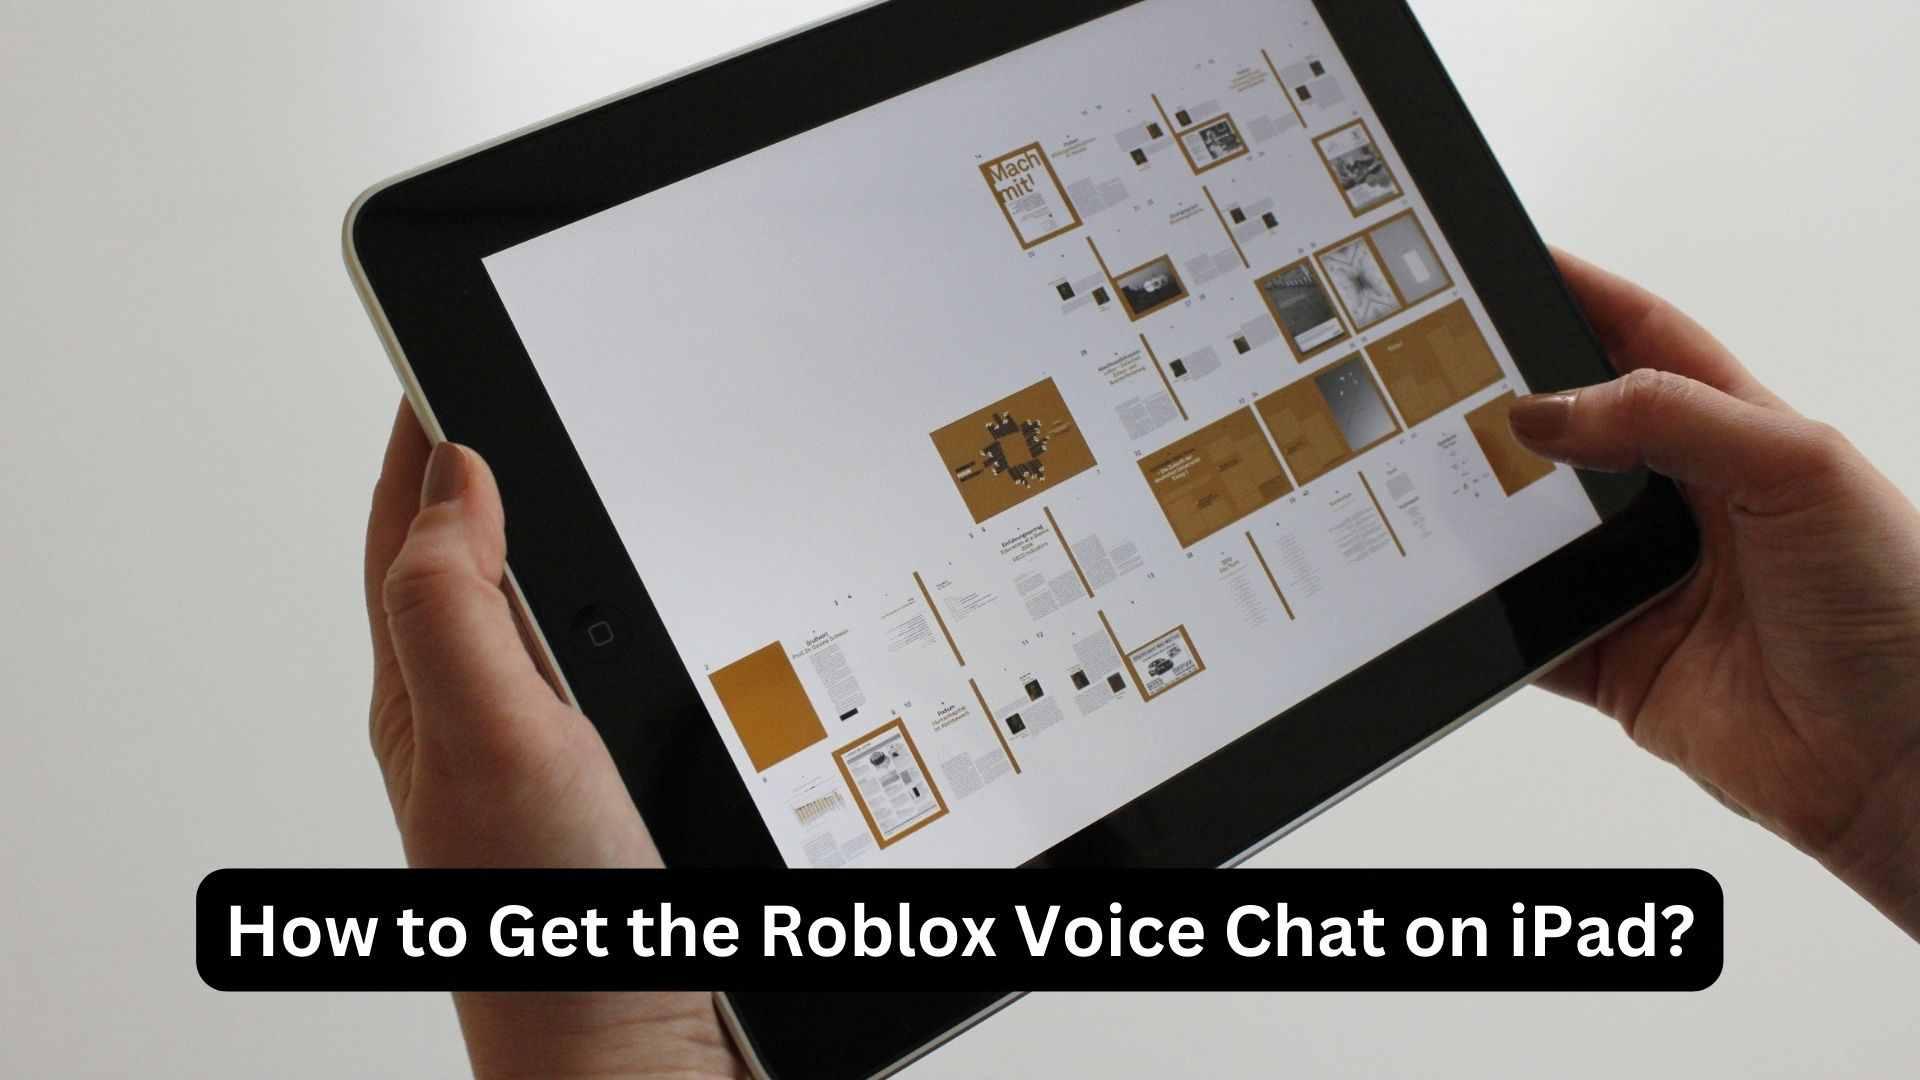 How to Get the Roblox Voice Chat on iPad?